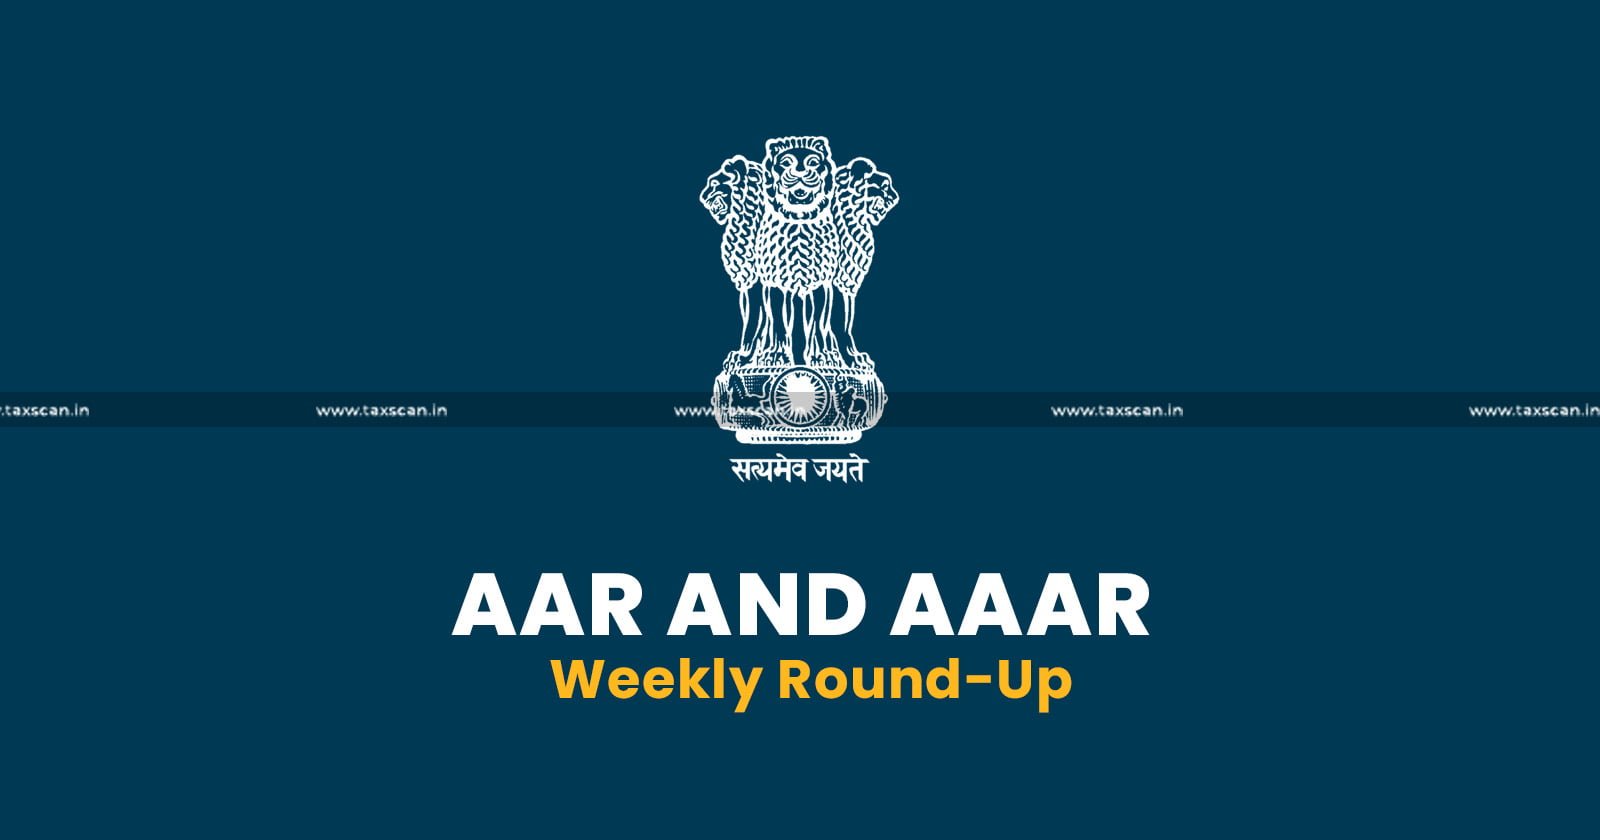 AAR - AAAR - Weekly Round-Up -AAAR Weekly Round-Up -AAR Weekly Round-Up - taxscan